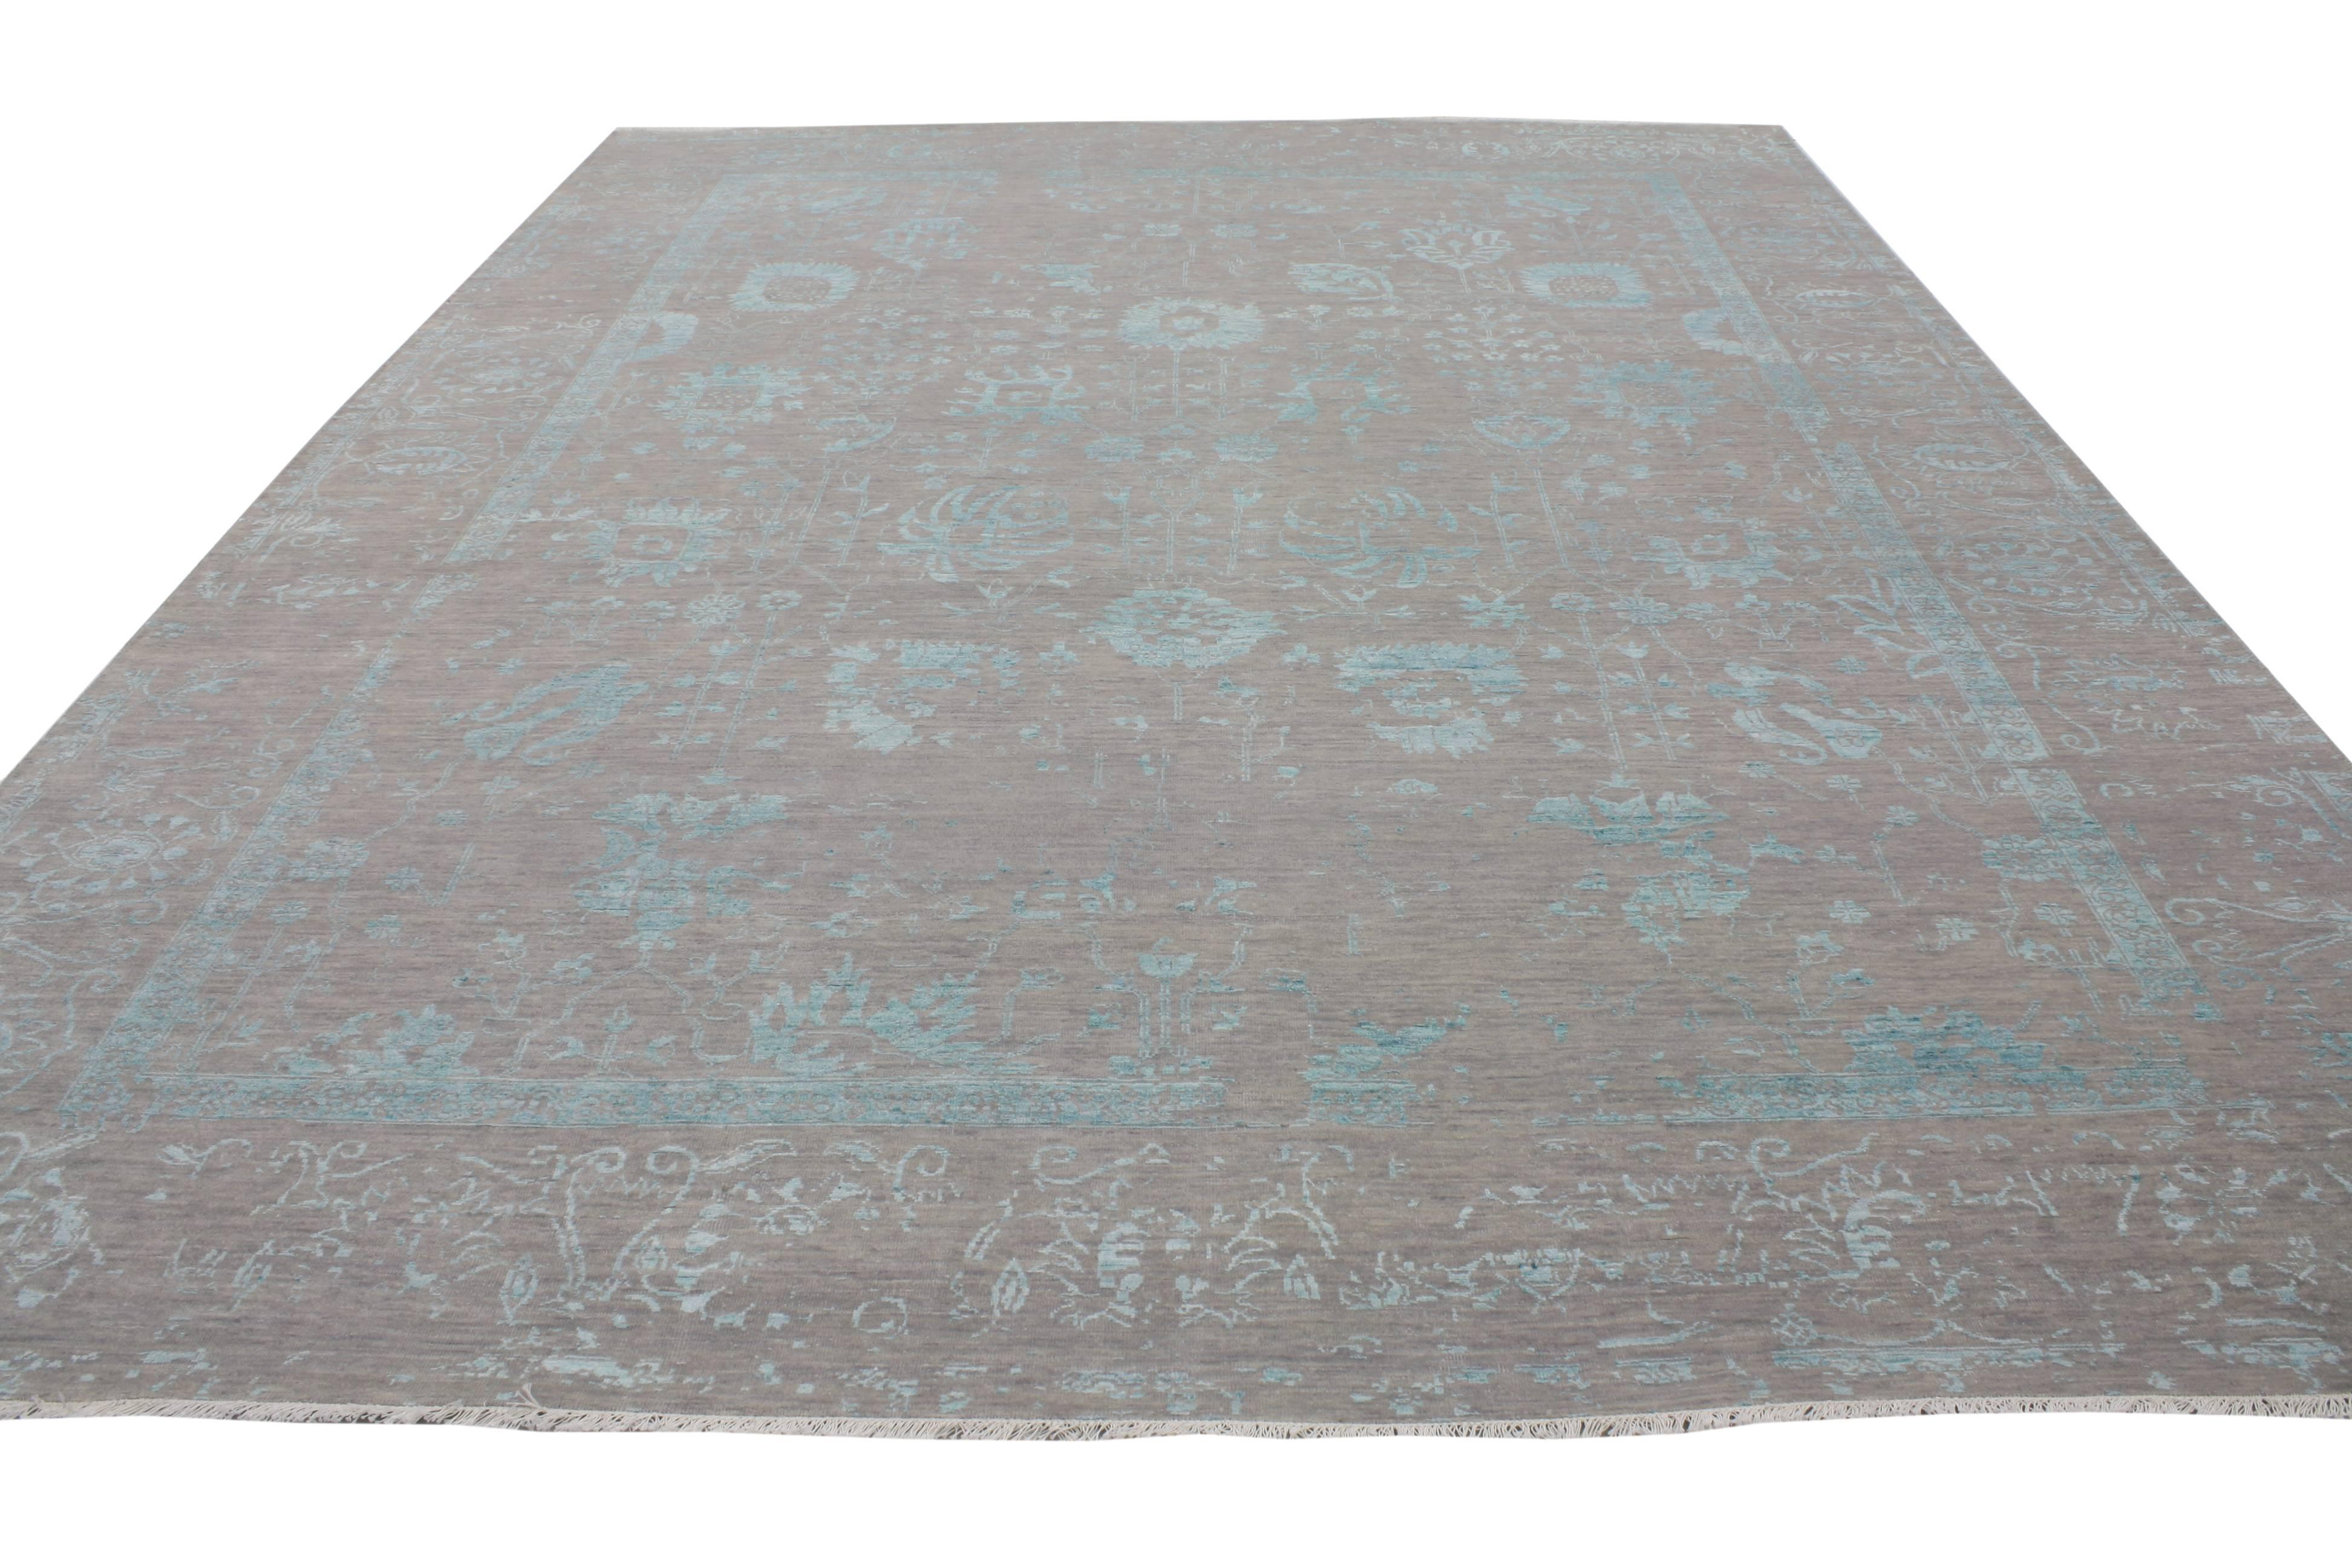 Indian Contemporary Gray Oushak Rug with Erased Design and Modern, Abstract Style